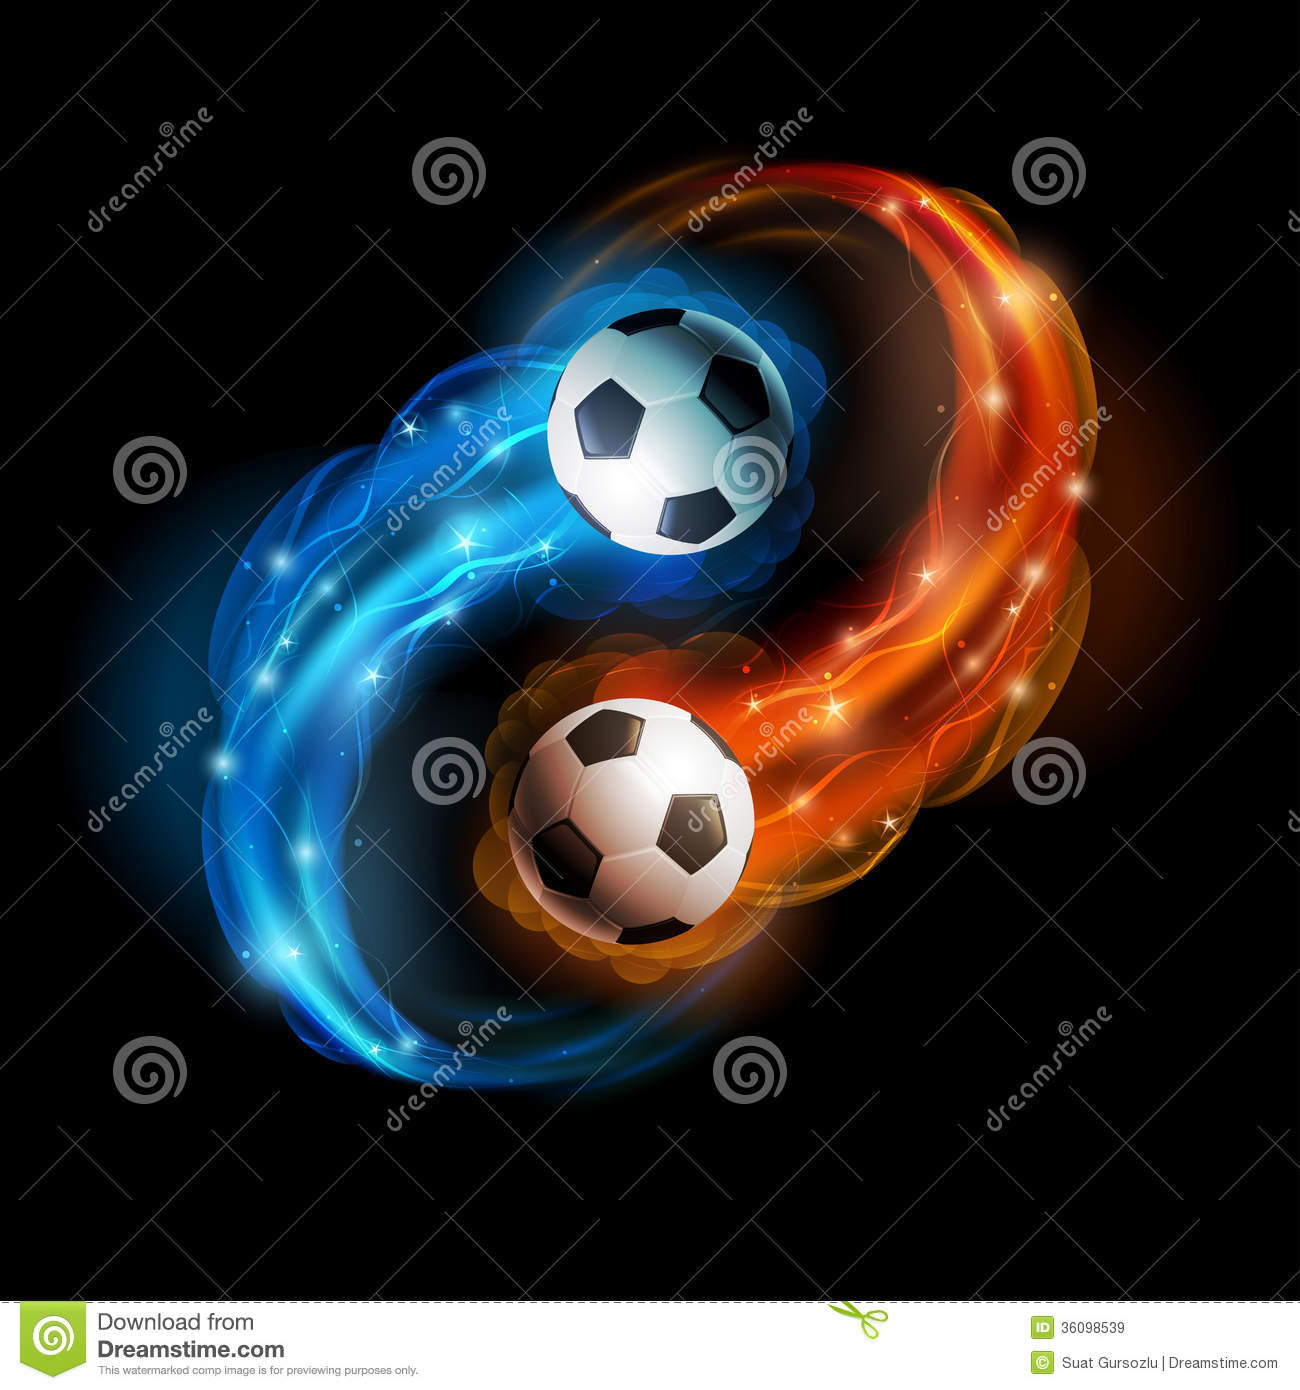 Cool Soccer Pictures Image Amp Becuo